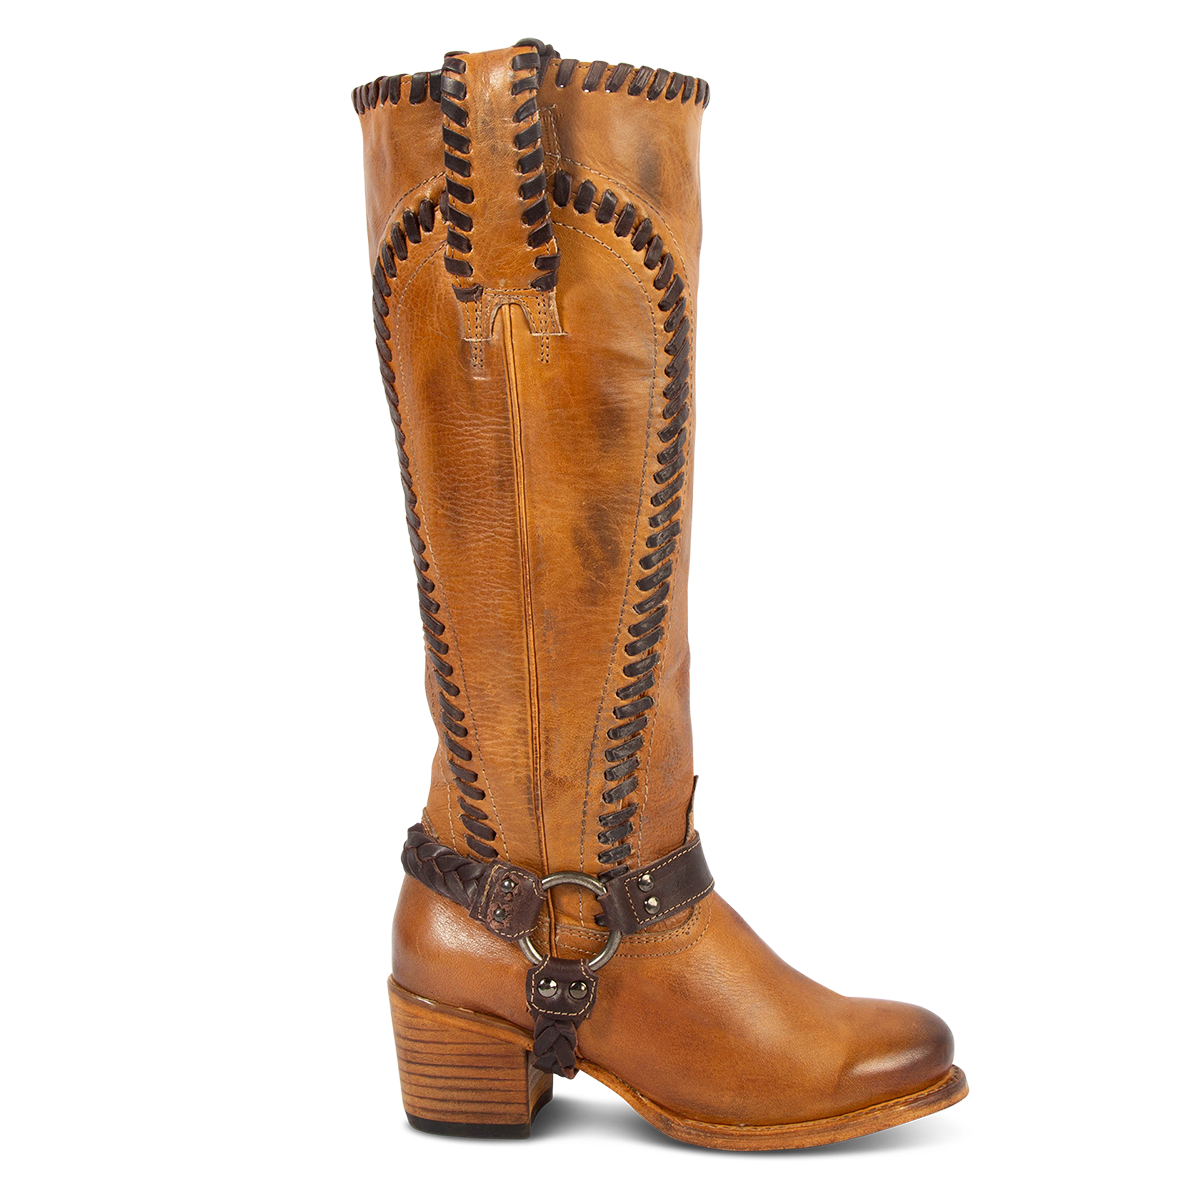 FREEBIRD women's Clover wheat leather boot with whip stitch detailing, inside half zip closure and braided ankle harness